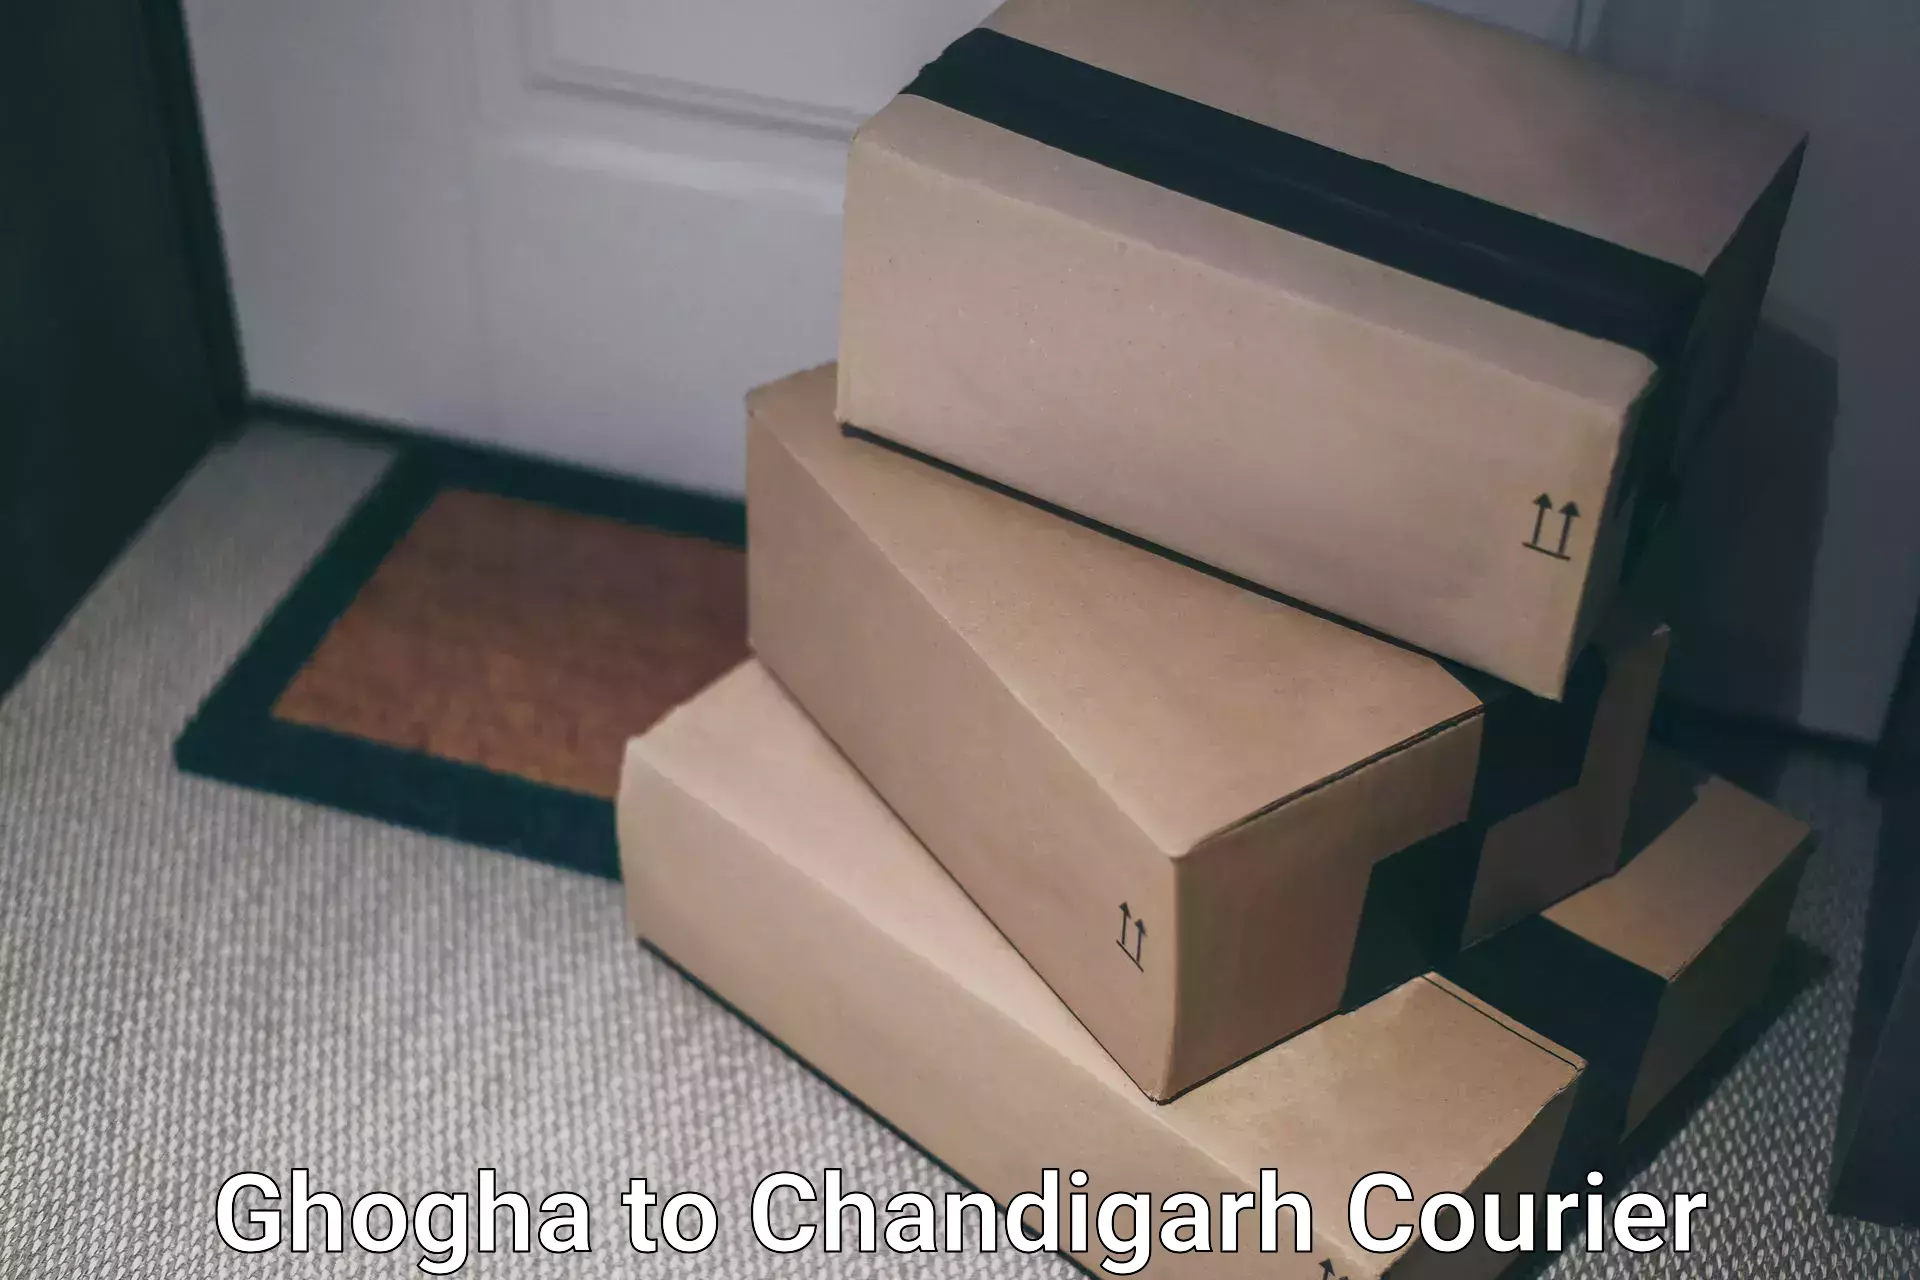 Doorstep delivery service Ghogha to Chandigarh